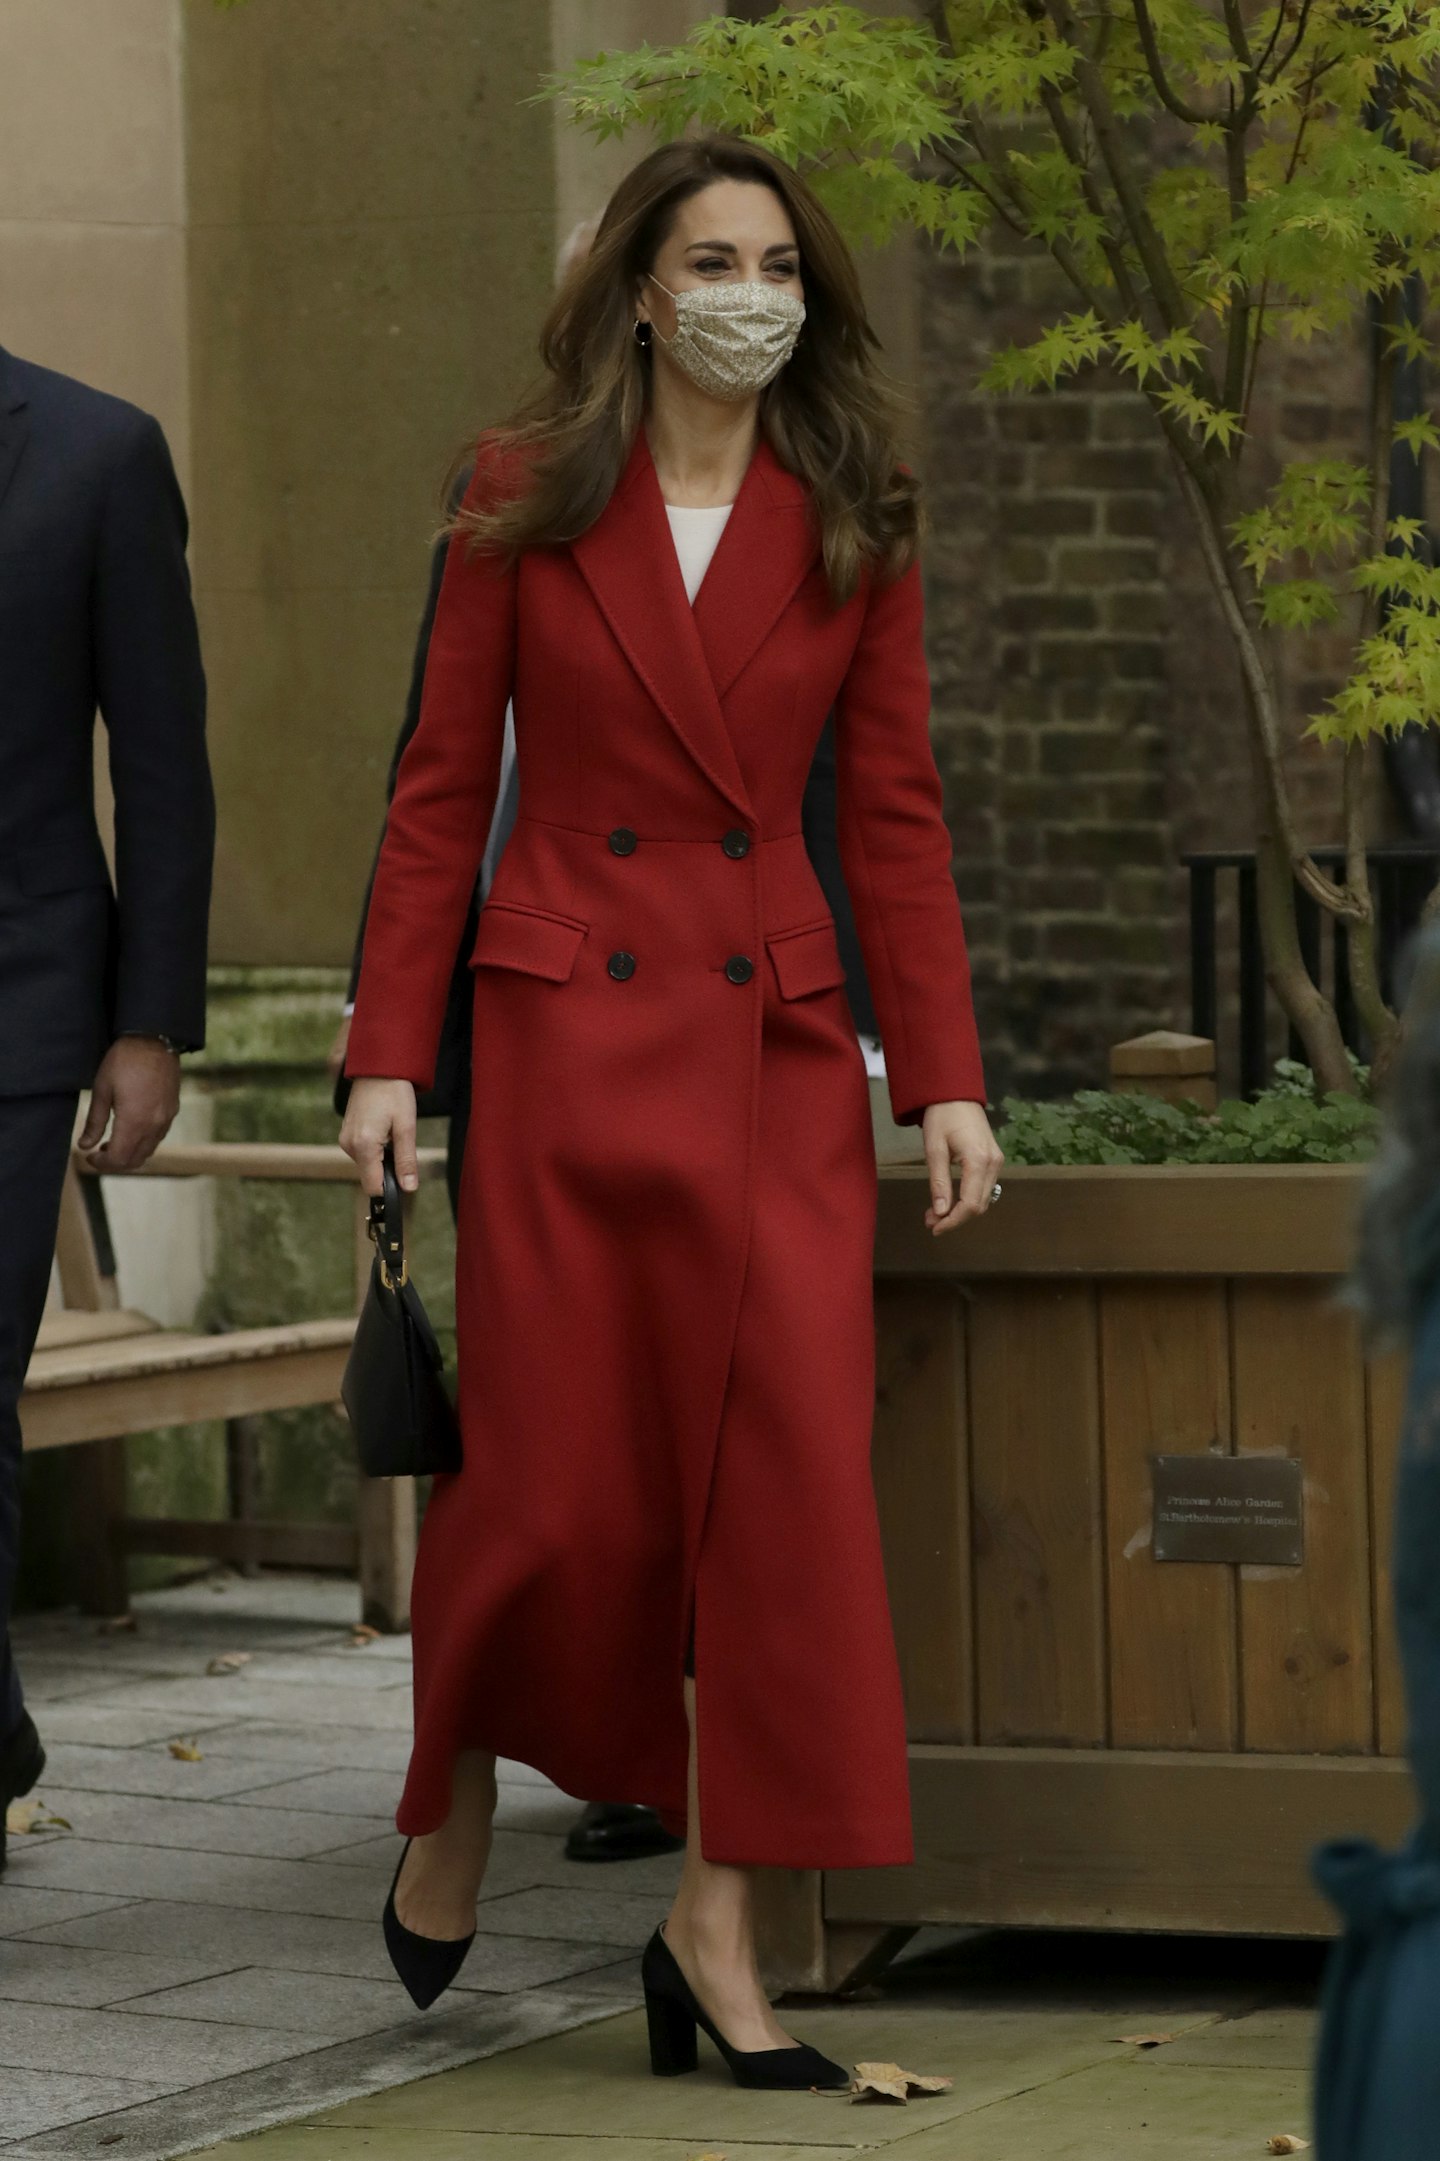 Kate Middleton wearing a red coat from Alexander McQueen